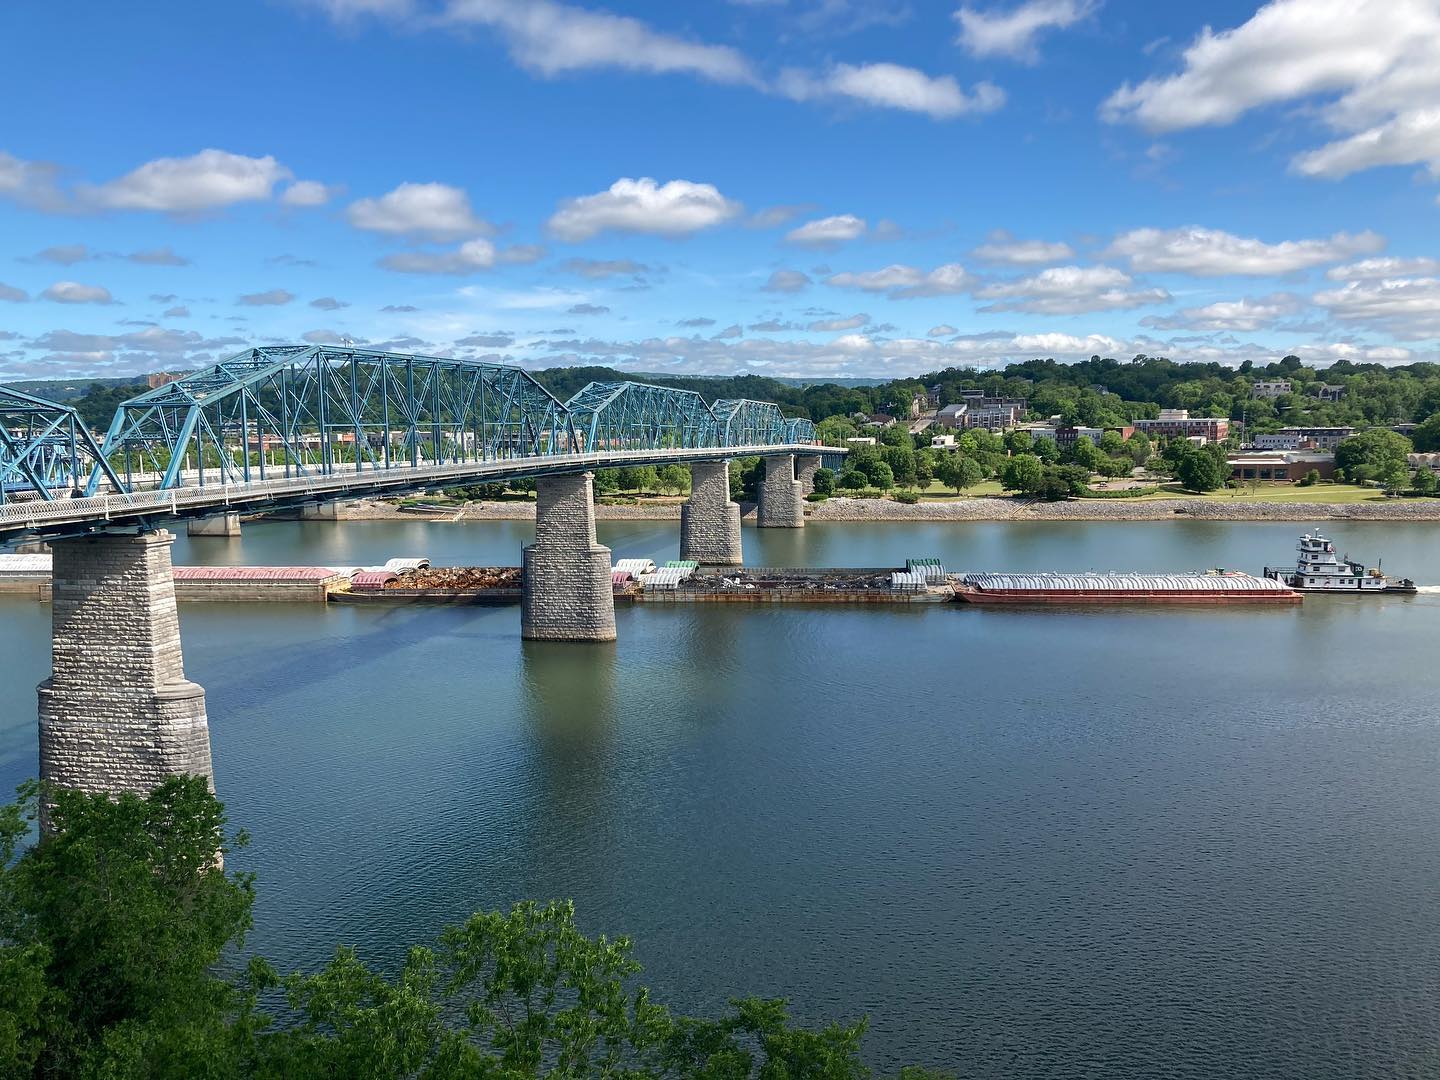 Today was a beautiful day to be out and about. 

#chattanooga #tennesseeriver #walnutstreetbridge #pedestrianbridge #spring #outdoors #walking #outandabout #explore #barge #river